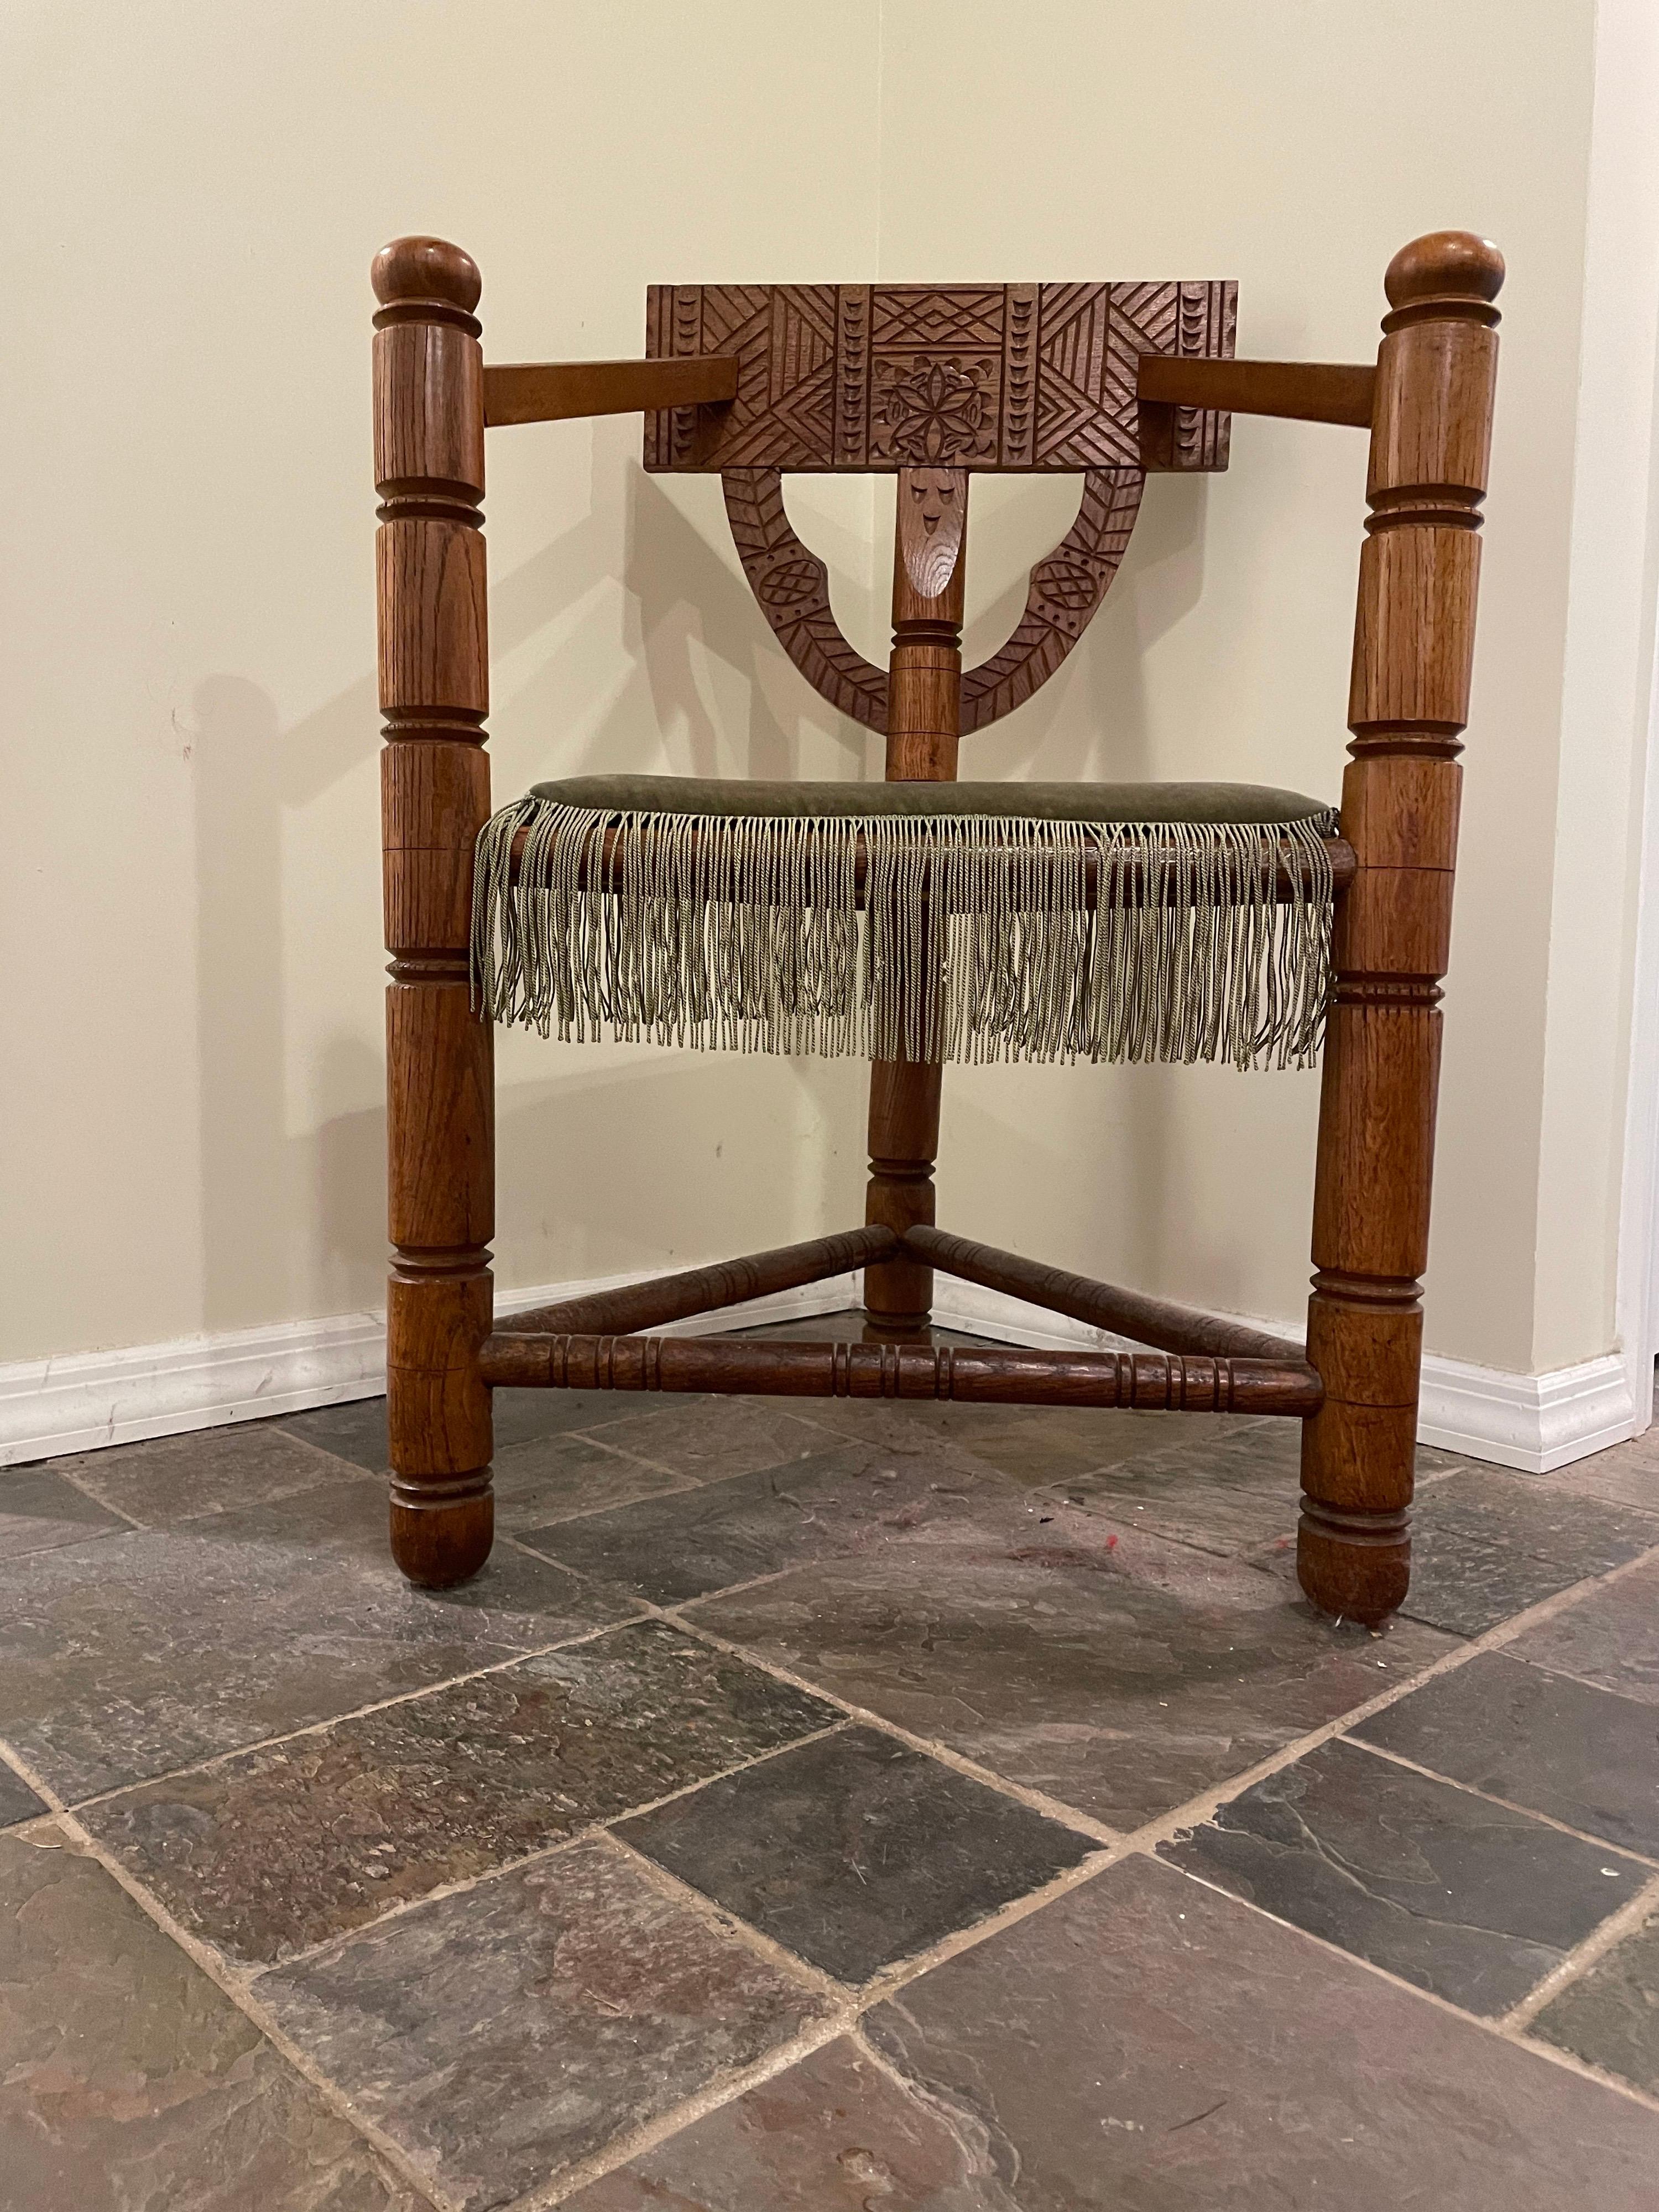 Hand crafted of solid European oak, this unique three legged chair is surprisingly strong and comfortable. This type of chair was carved with ancient 